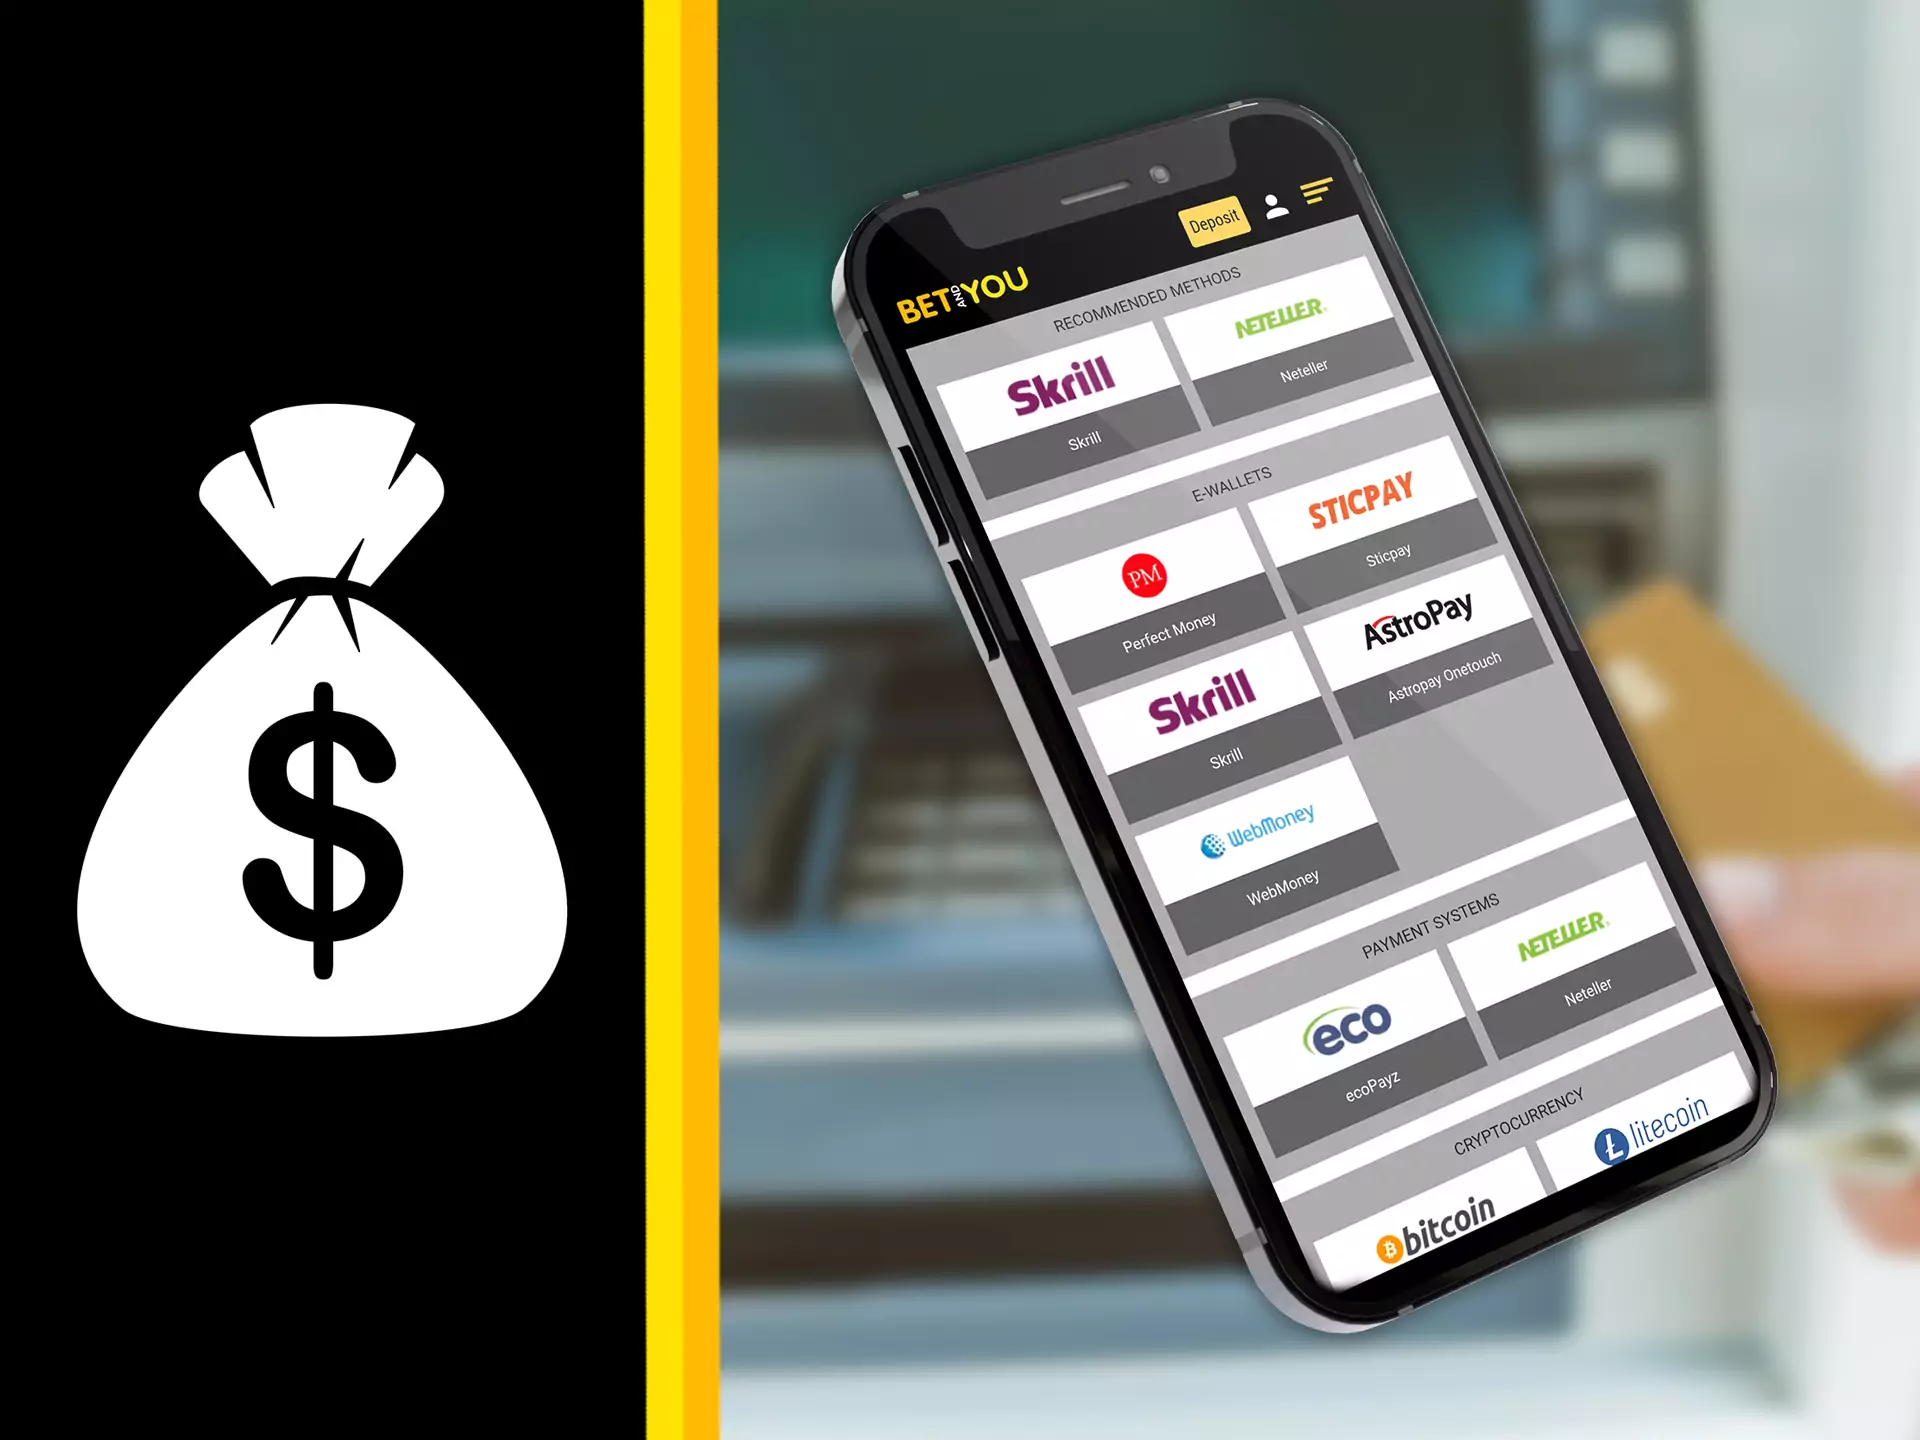 The Betandyou app supports the withdrawal of funds.